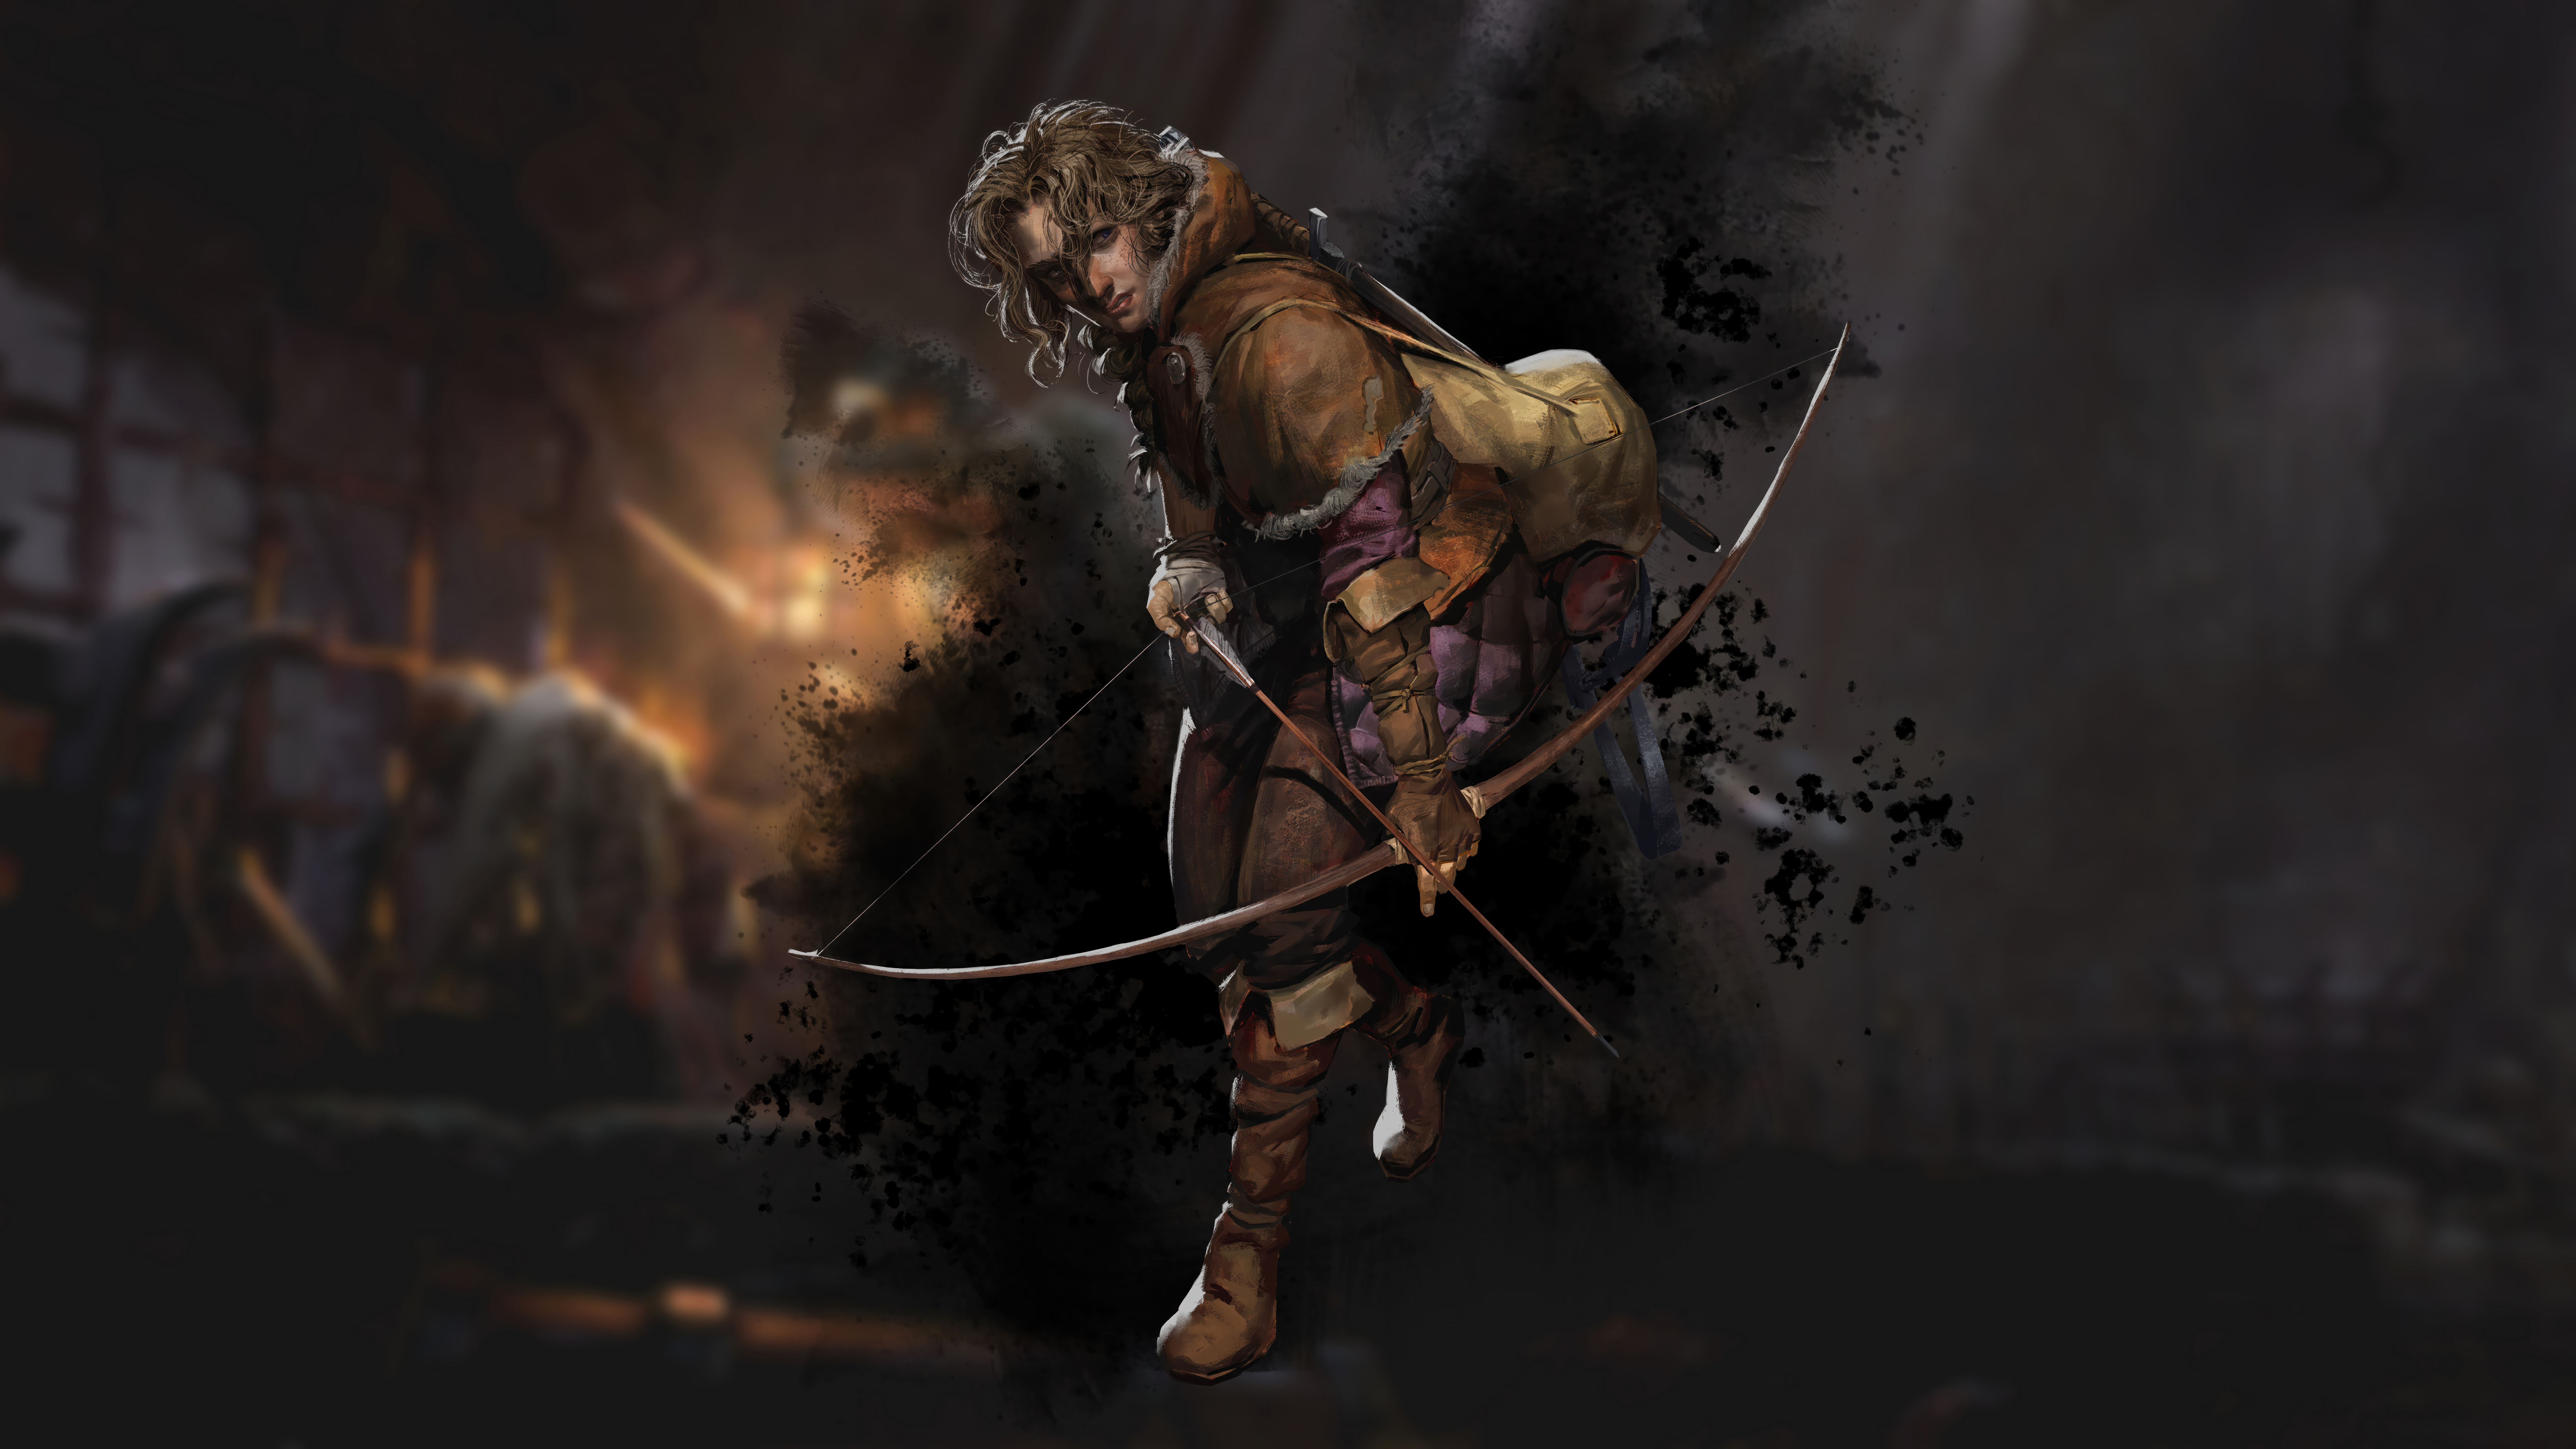 HD wallpaper featuring a medieval archer from the game Dark and Darker, poised for battle against a fiery background.